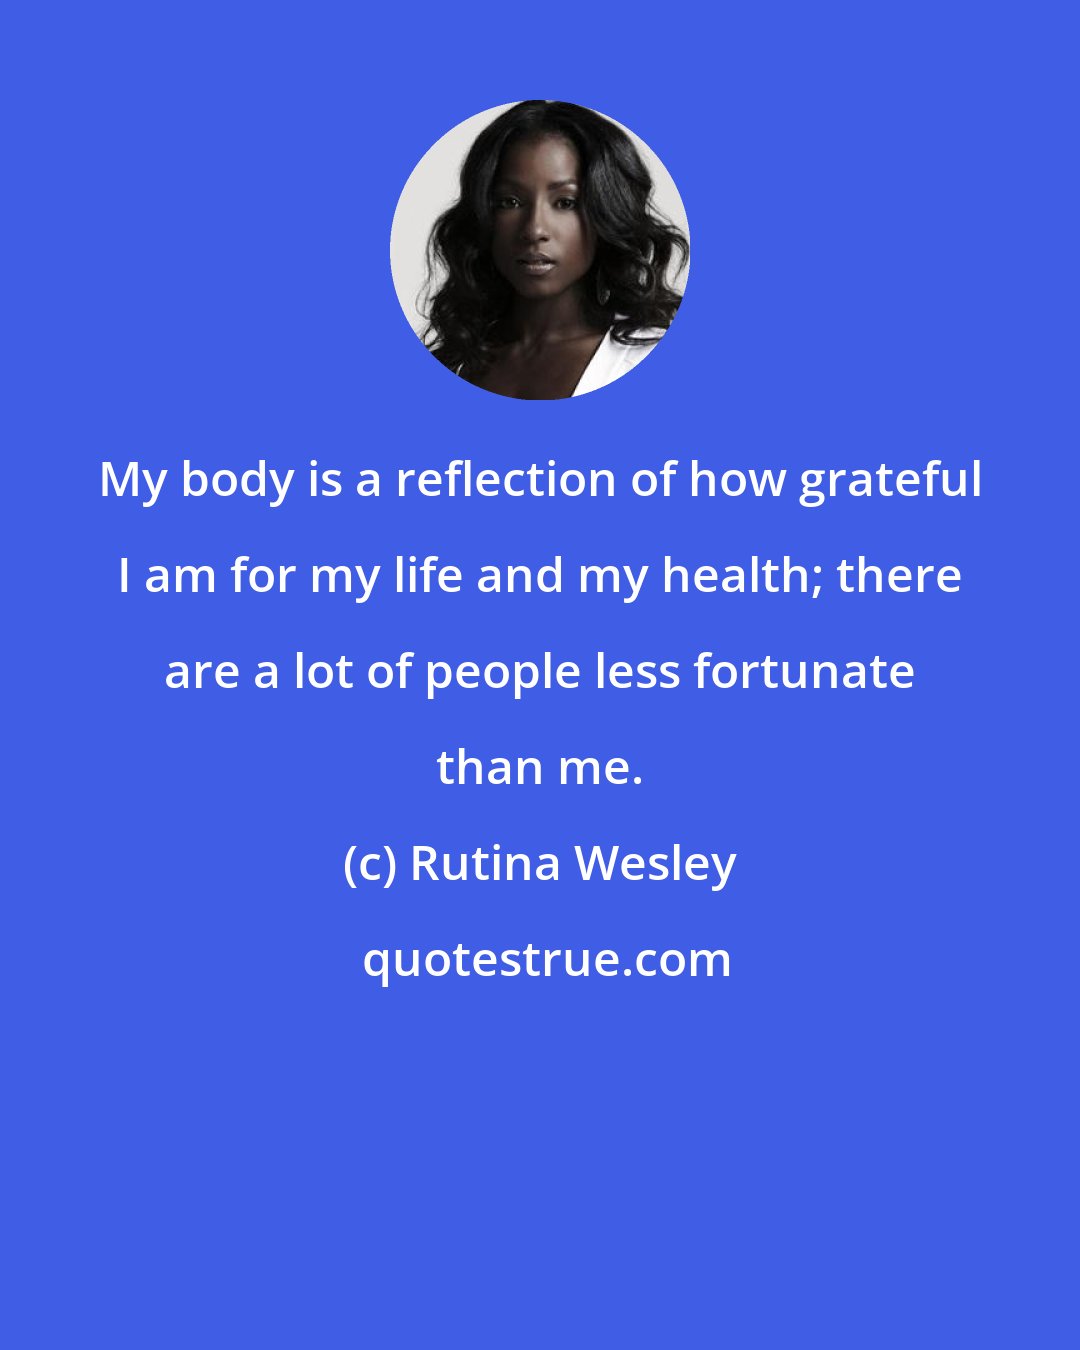 Rutina Wesley: My body is a reflection of how grateful I am for my life and my health; there are a lot of people less fortunate than me.